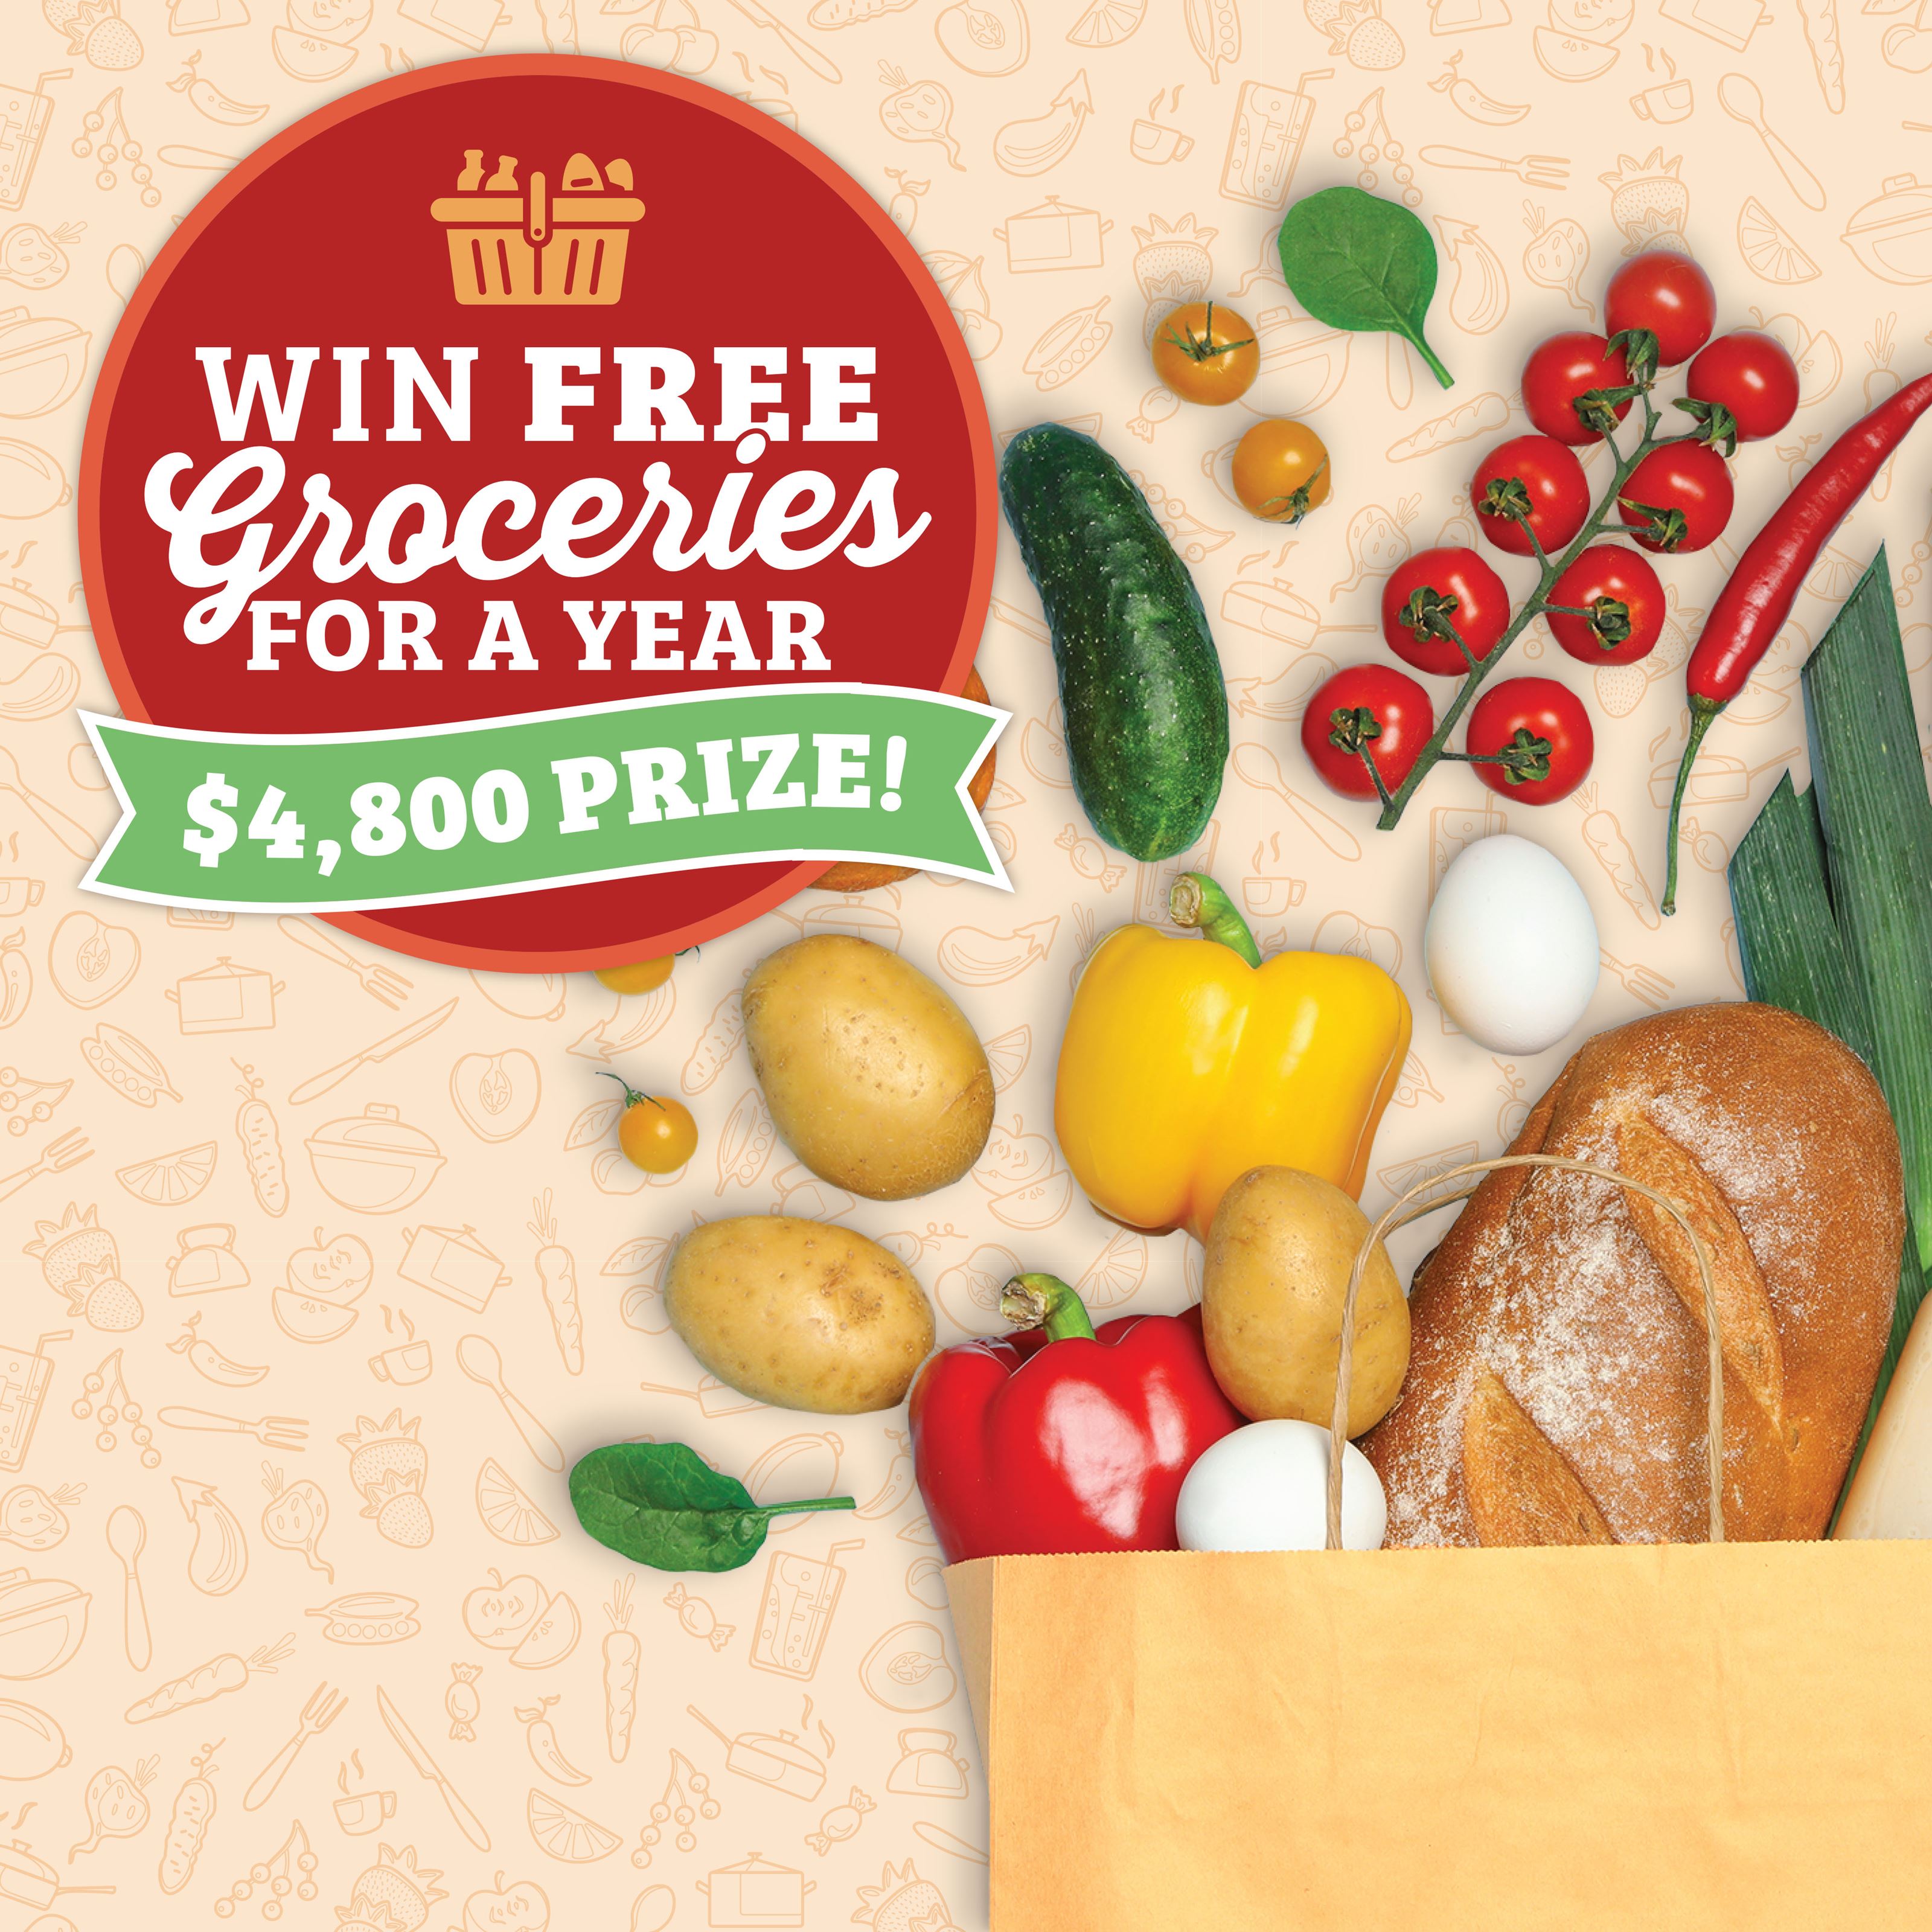 Groceries For A Year Sweepstakes